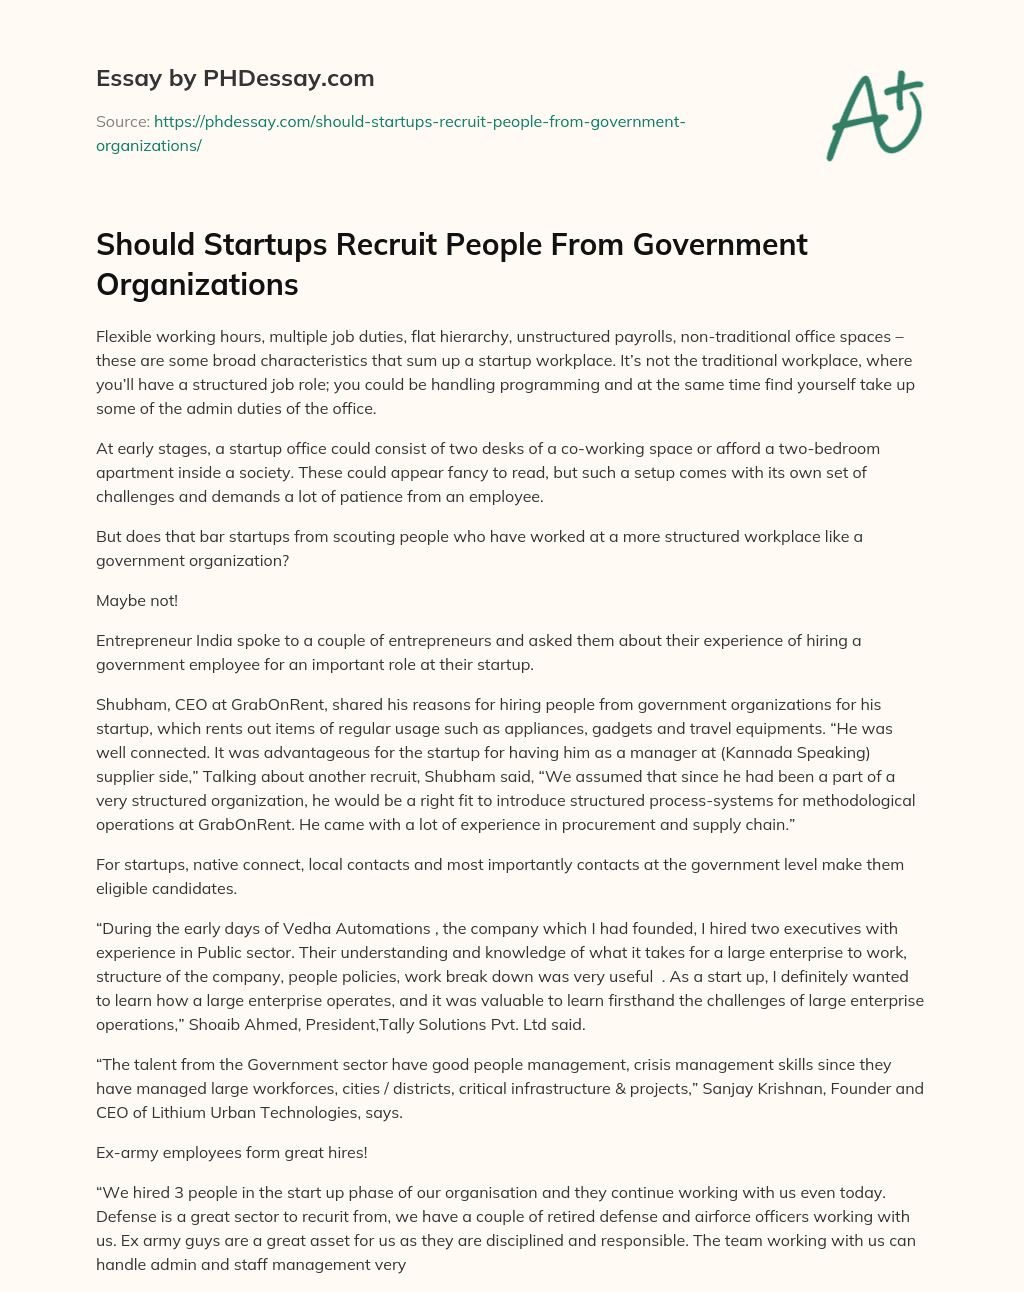 Should Startups Recruit People From Government Organizations essay